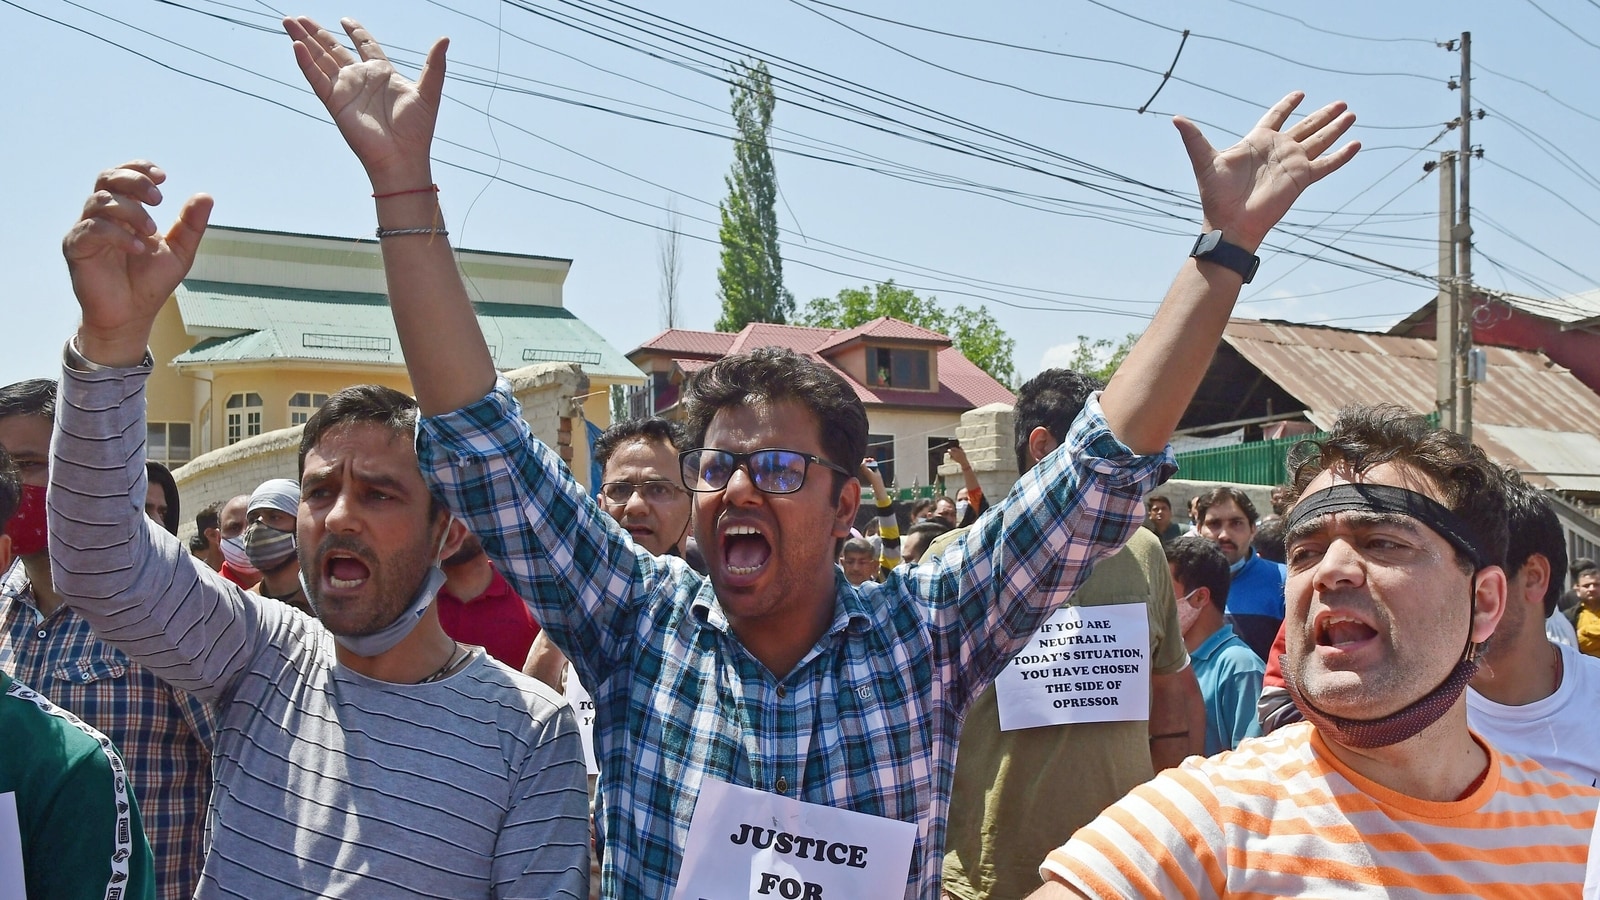 J&K Pandits in govt jobs threaten to resign over employee’s death | Latest News India